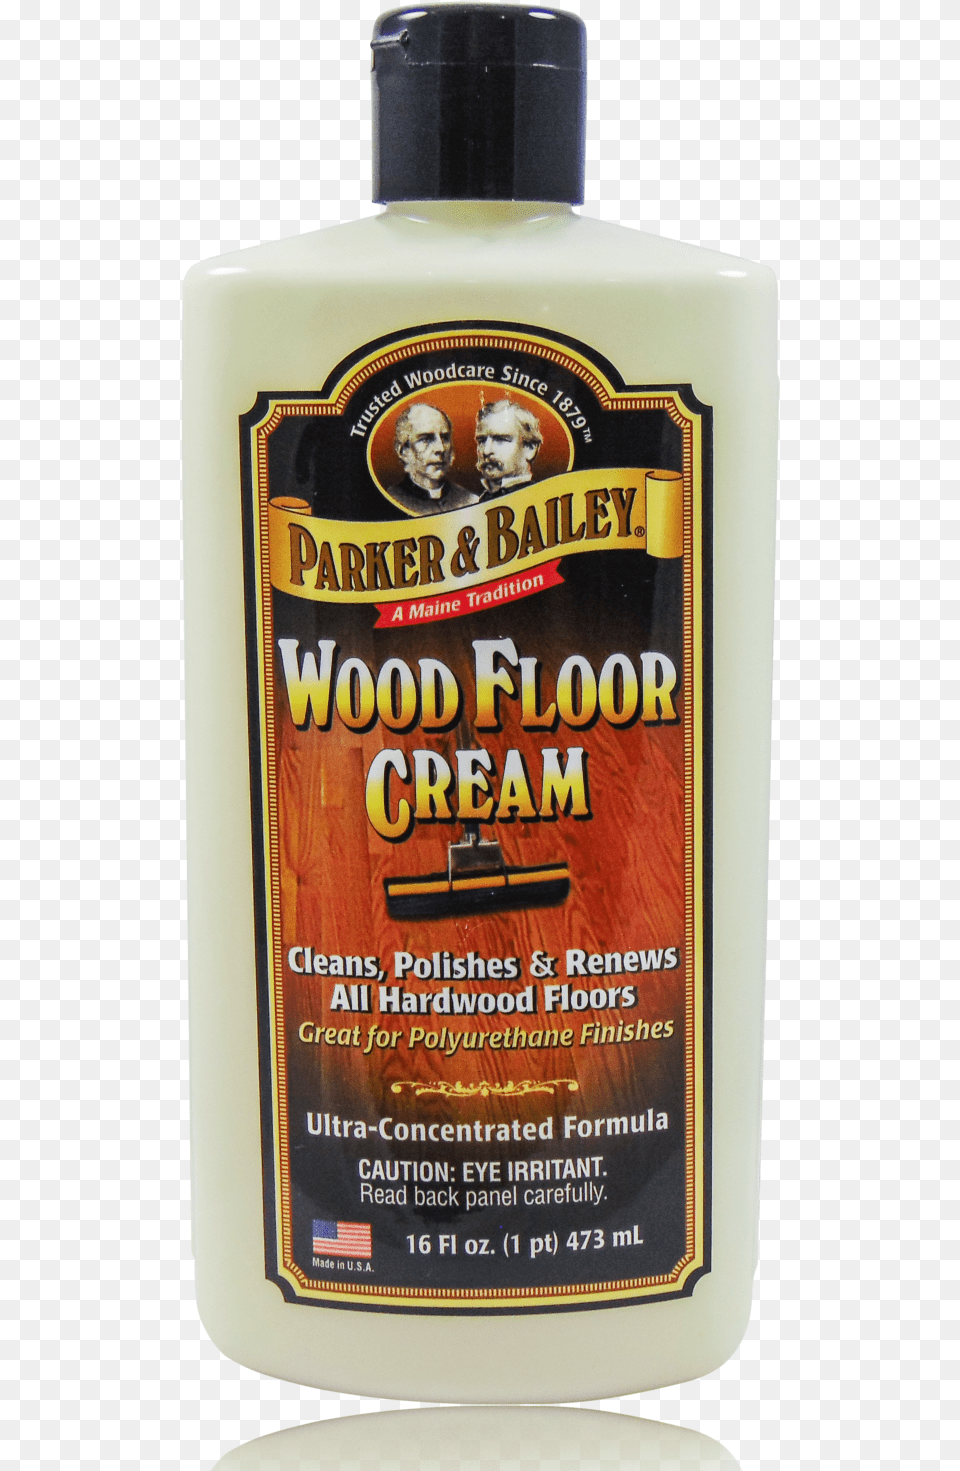 Wood Floor Cream Bottle, Aftershave, Person, Cosmetics, Perfume Free Png Download